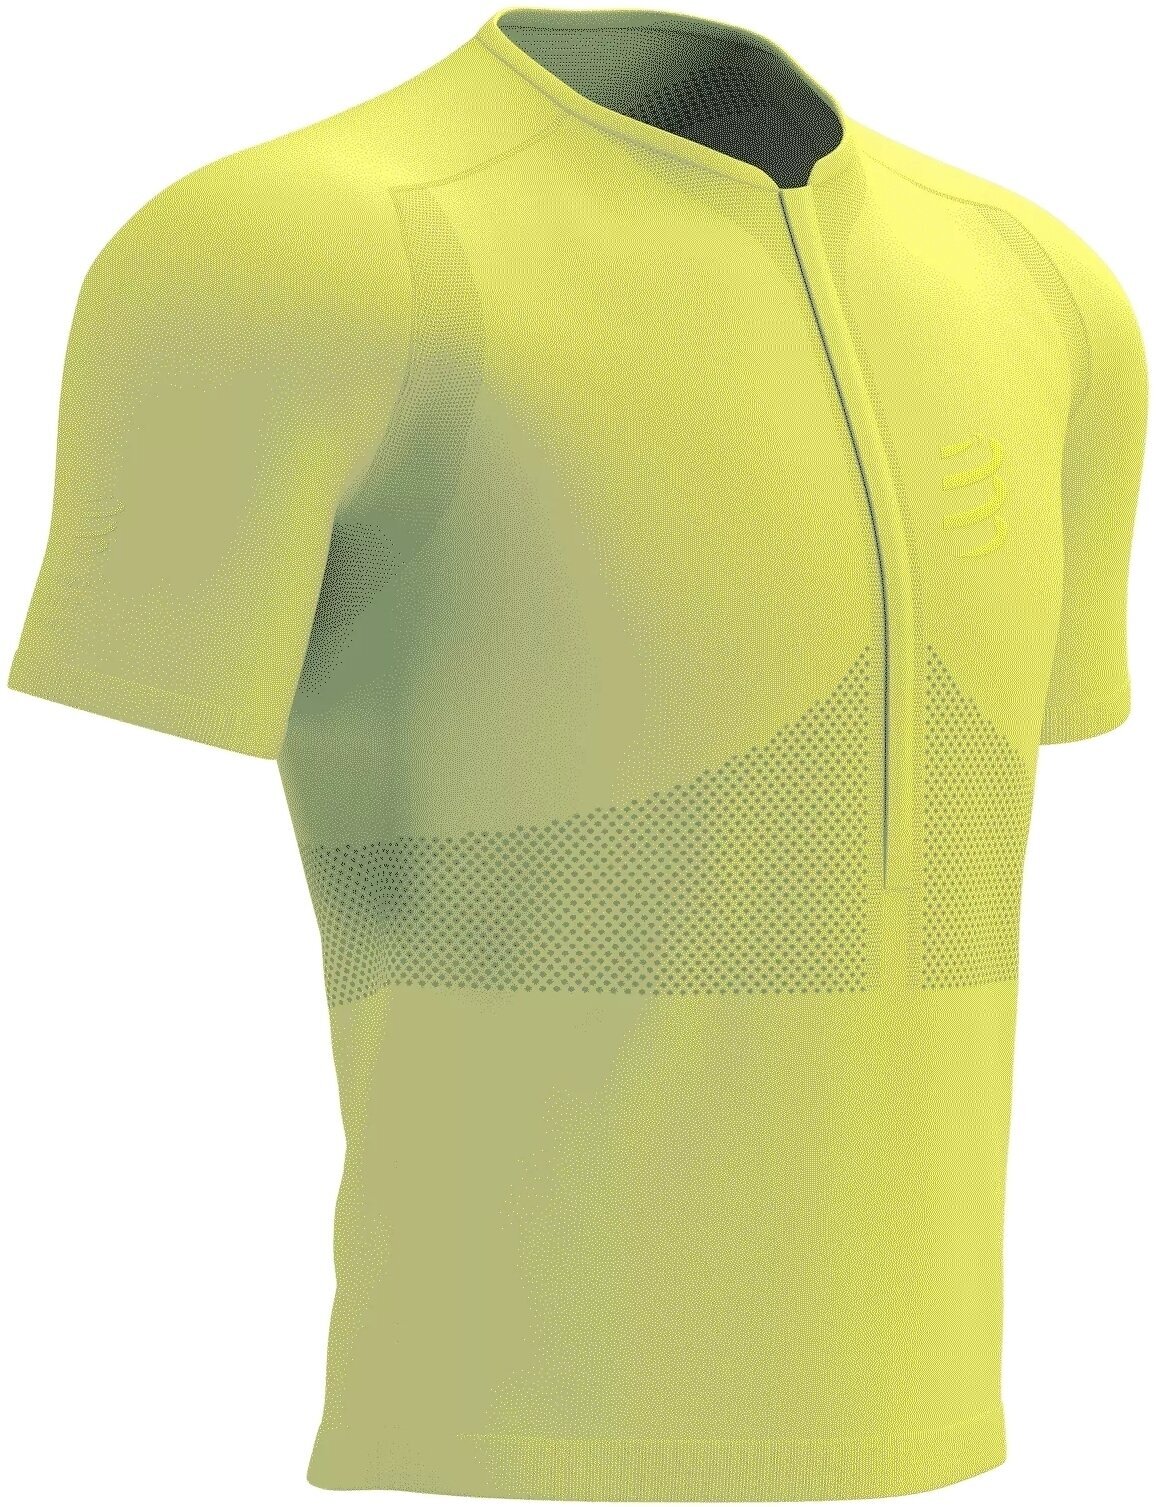 Chemise de course à manches courtes Compressport Trail Half-Zip Fitted SS Top Green Sheen/Safety Yellow S Chemise de course à manches courtes